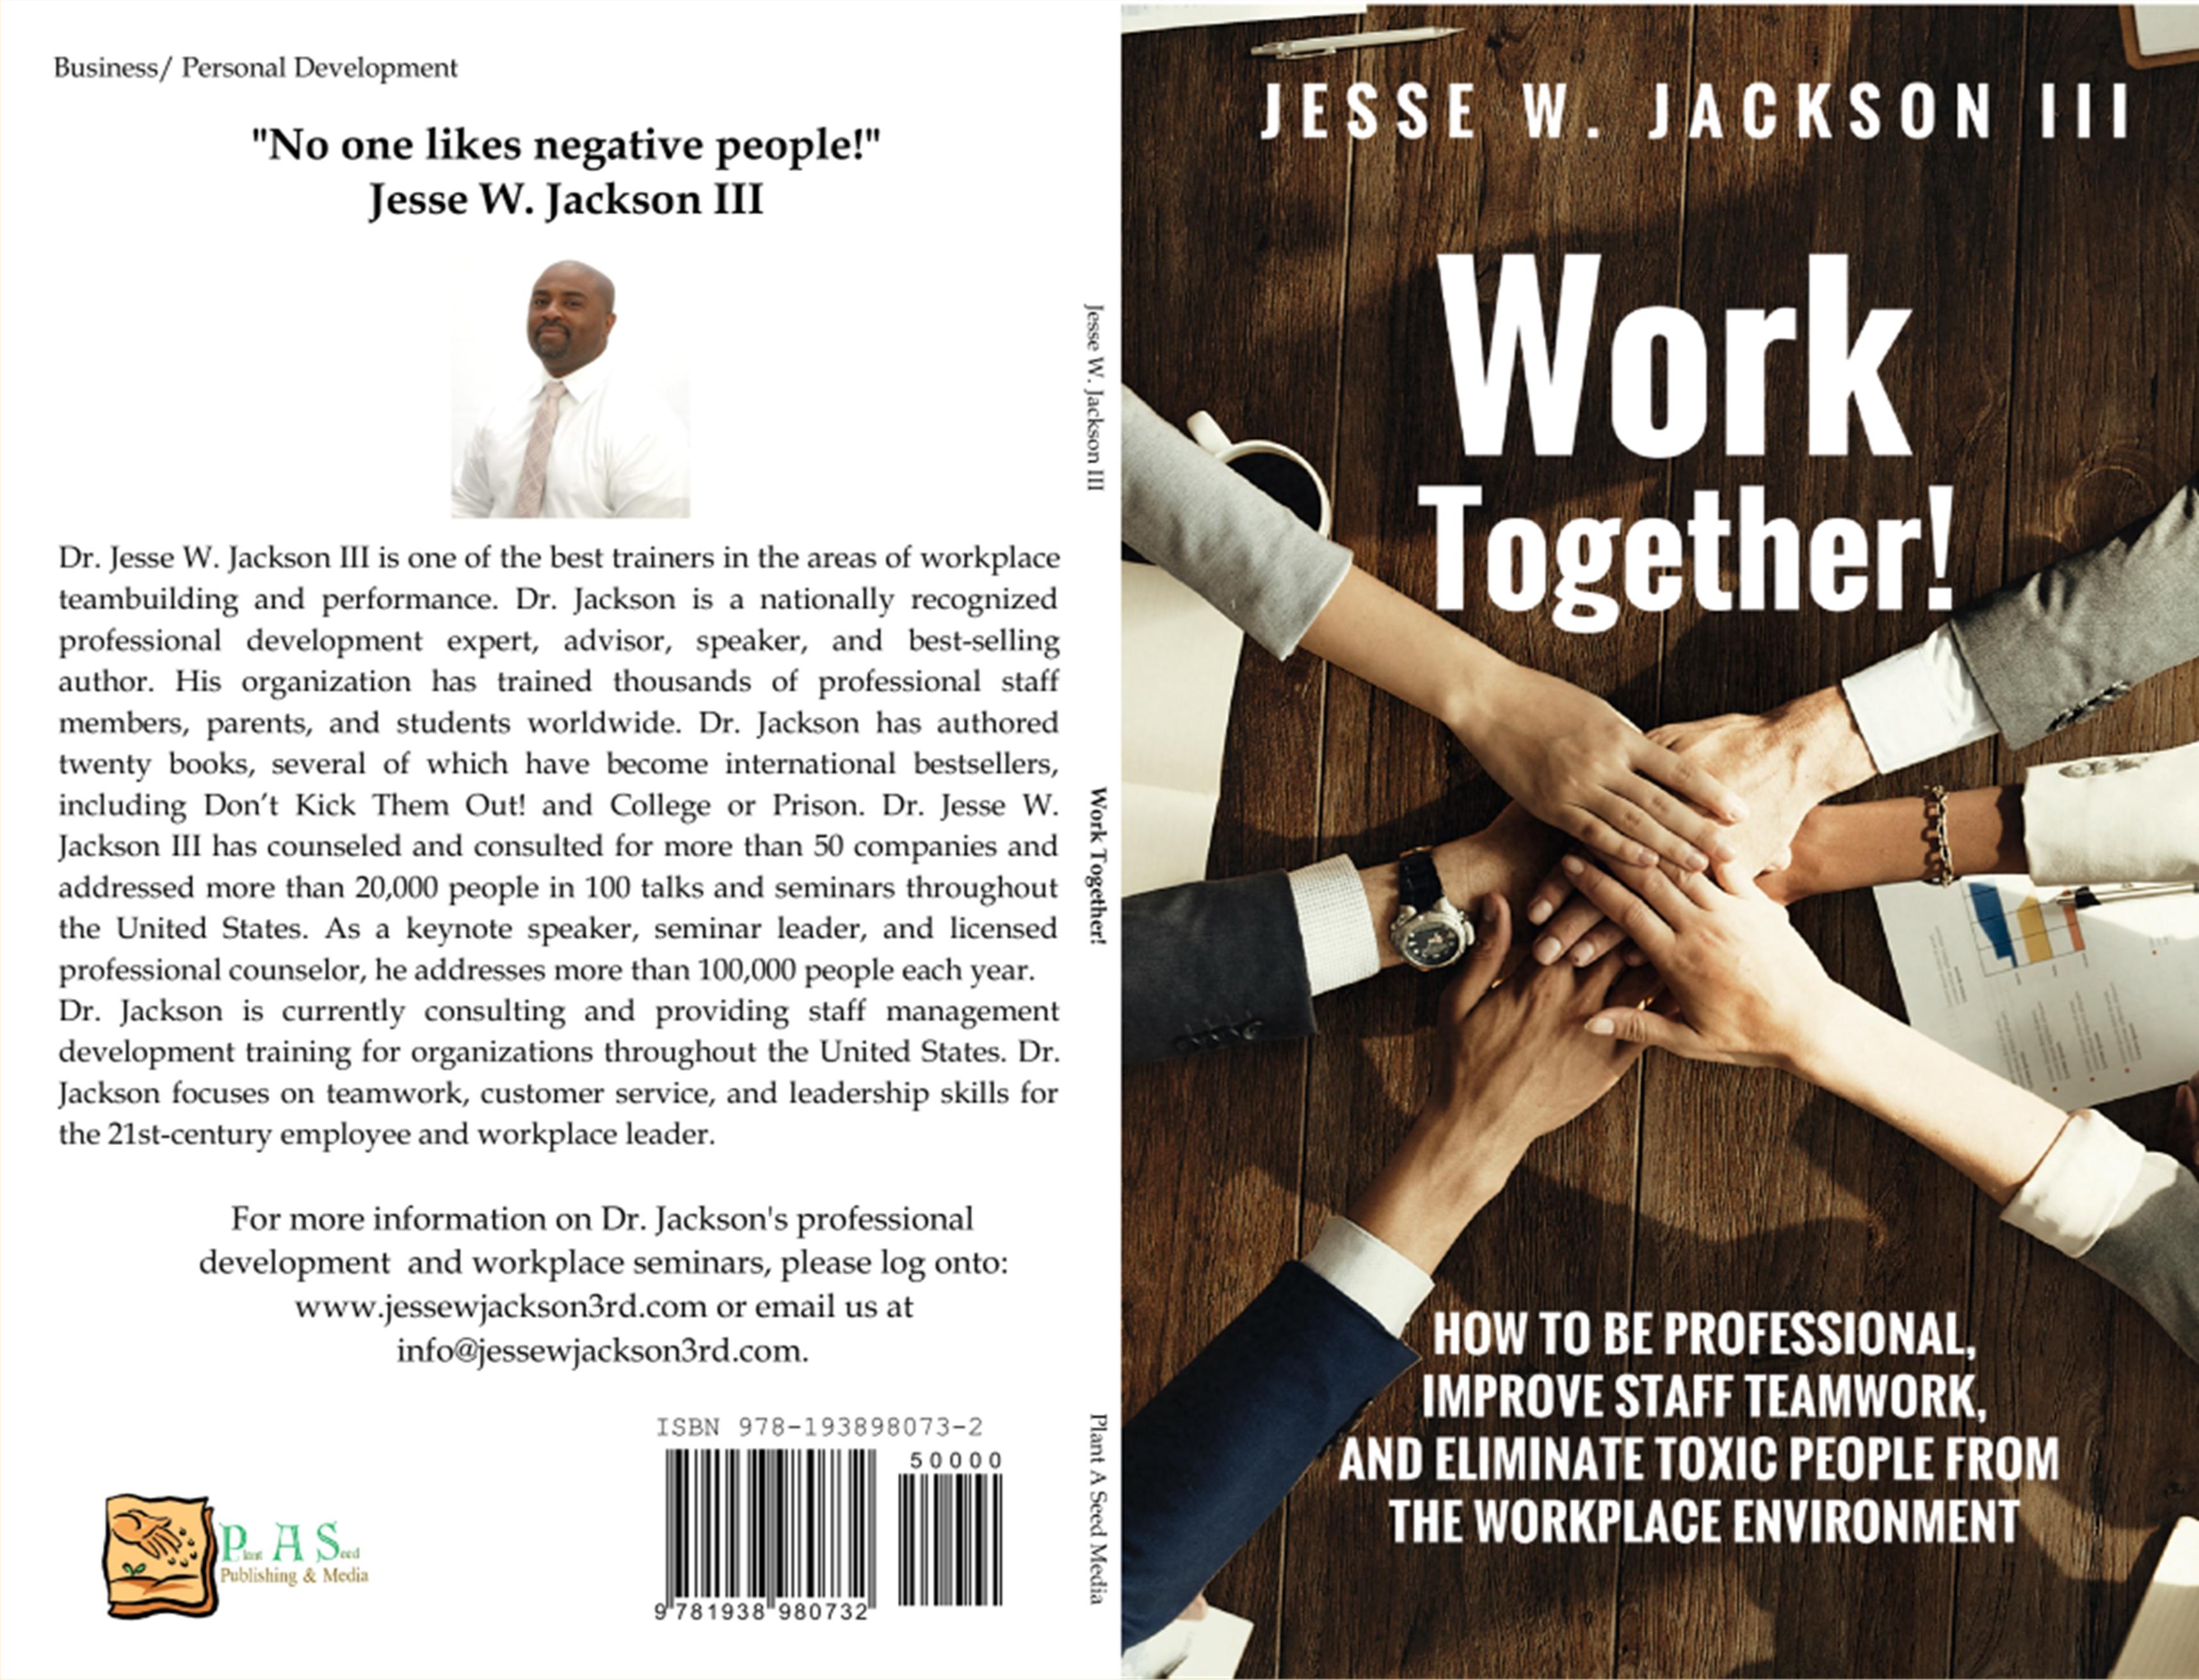 Work Together! How to Improve Teamwork & Eliminate Toxic People from the Workplace Environment cover image